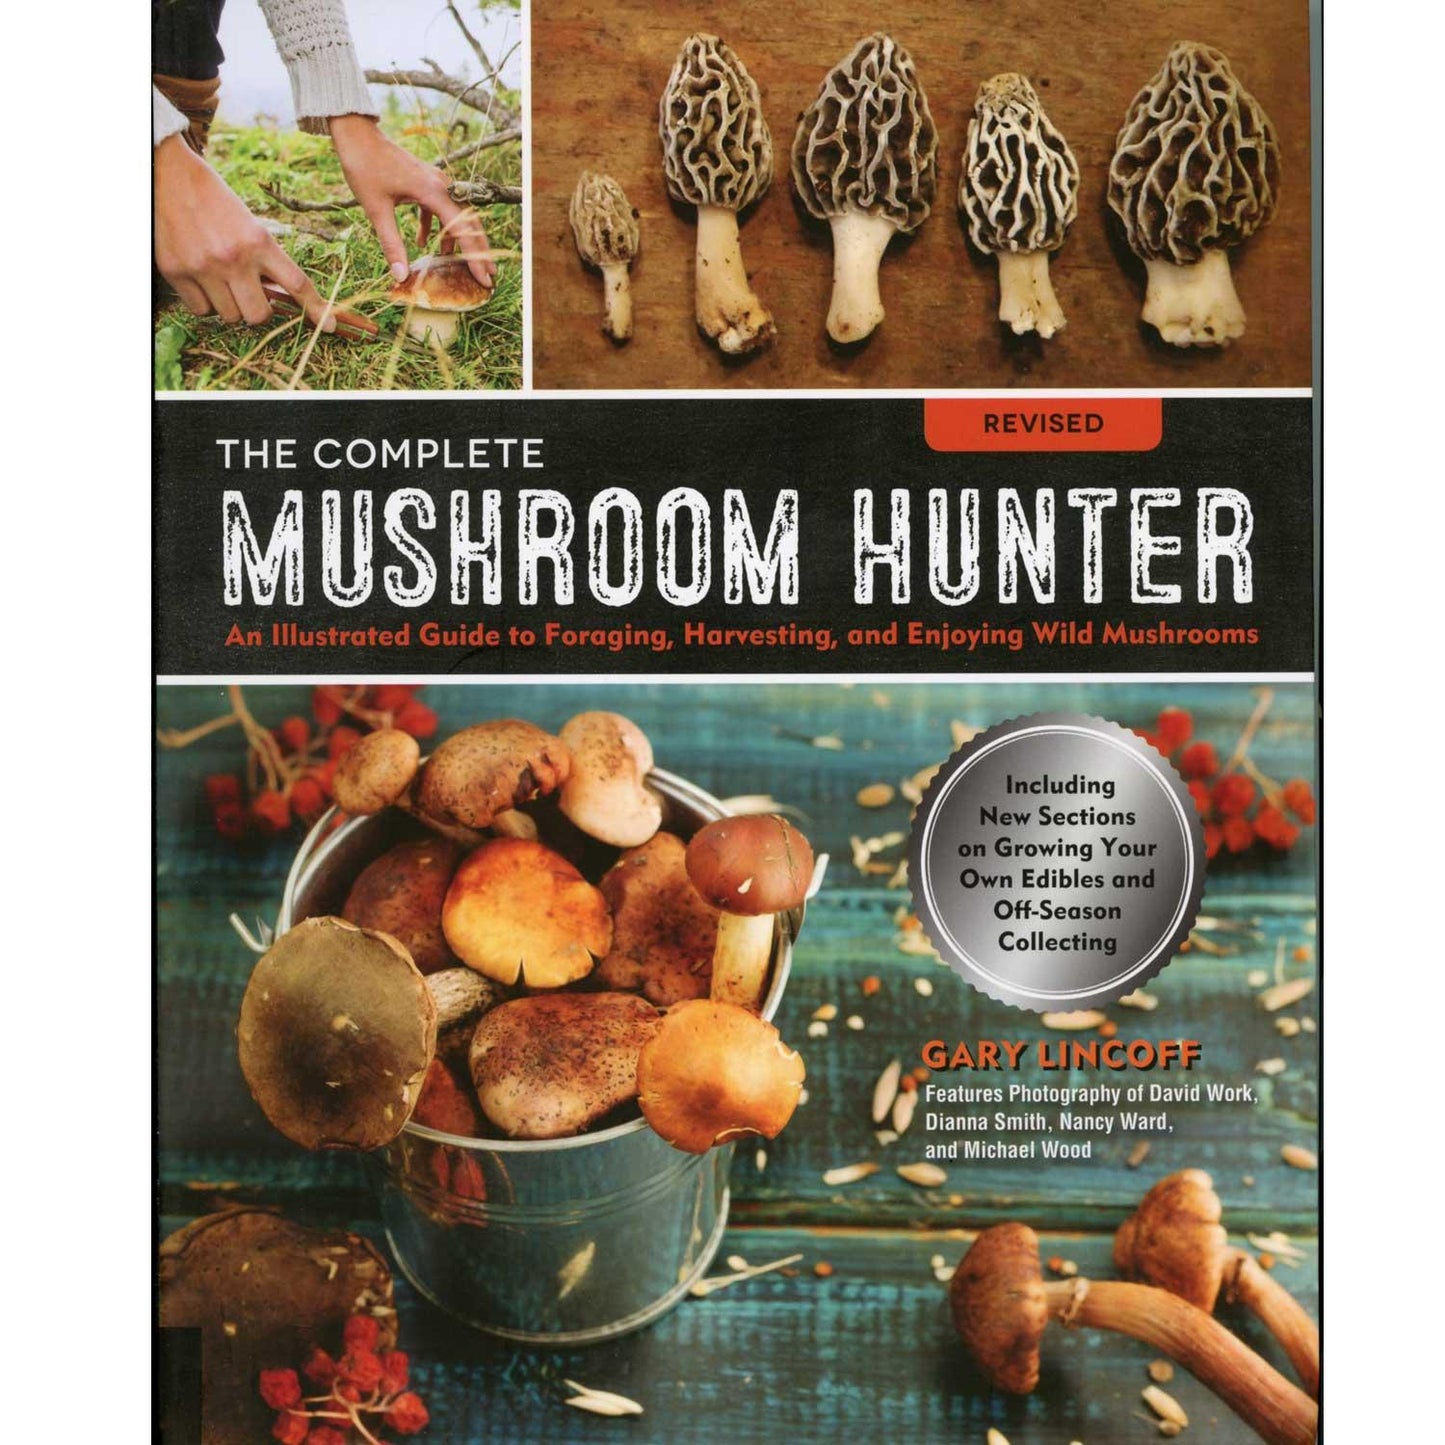 The Complete Mushroom Hunter:  An Illustrated Guide to Foraging, Harvesting, and Enjoying Wild Mushrooms